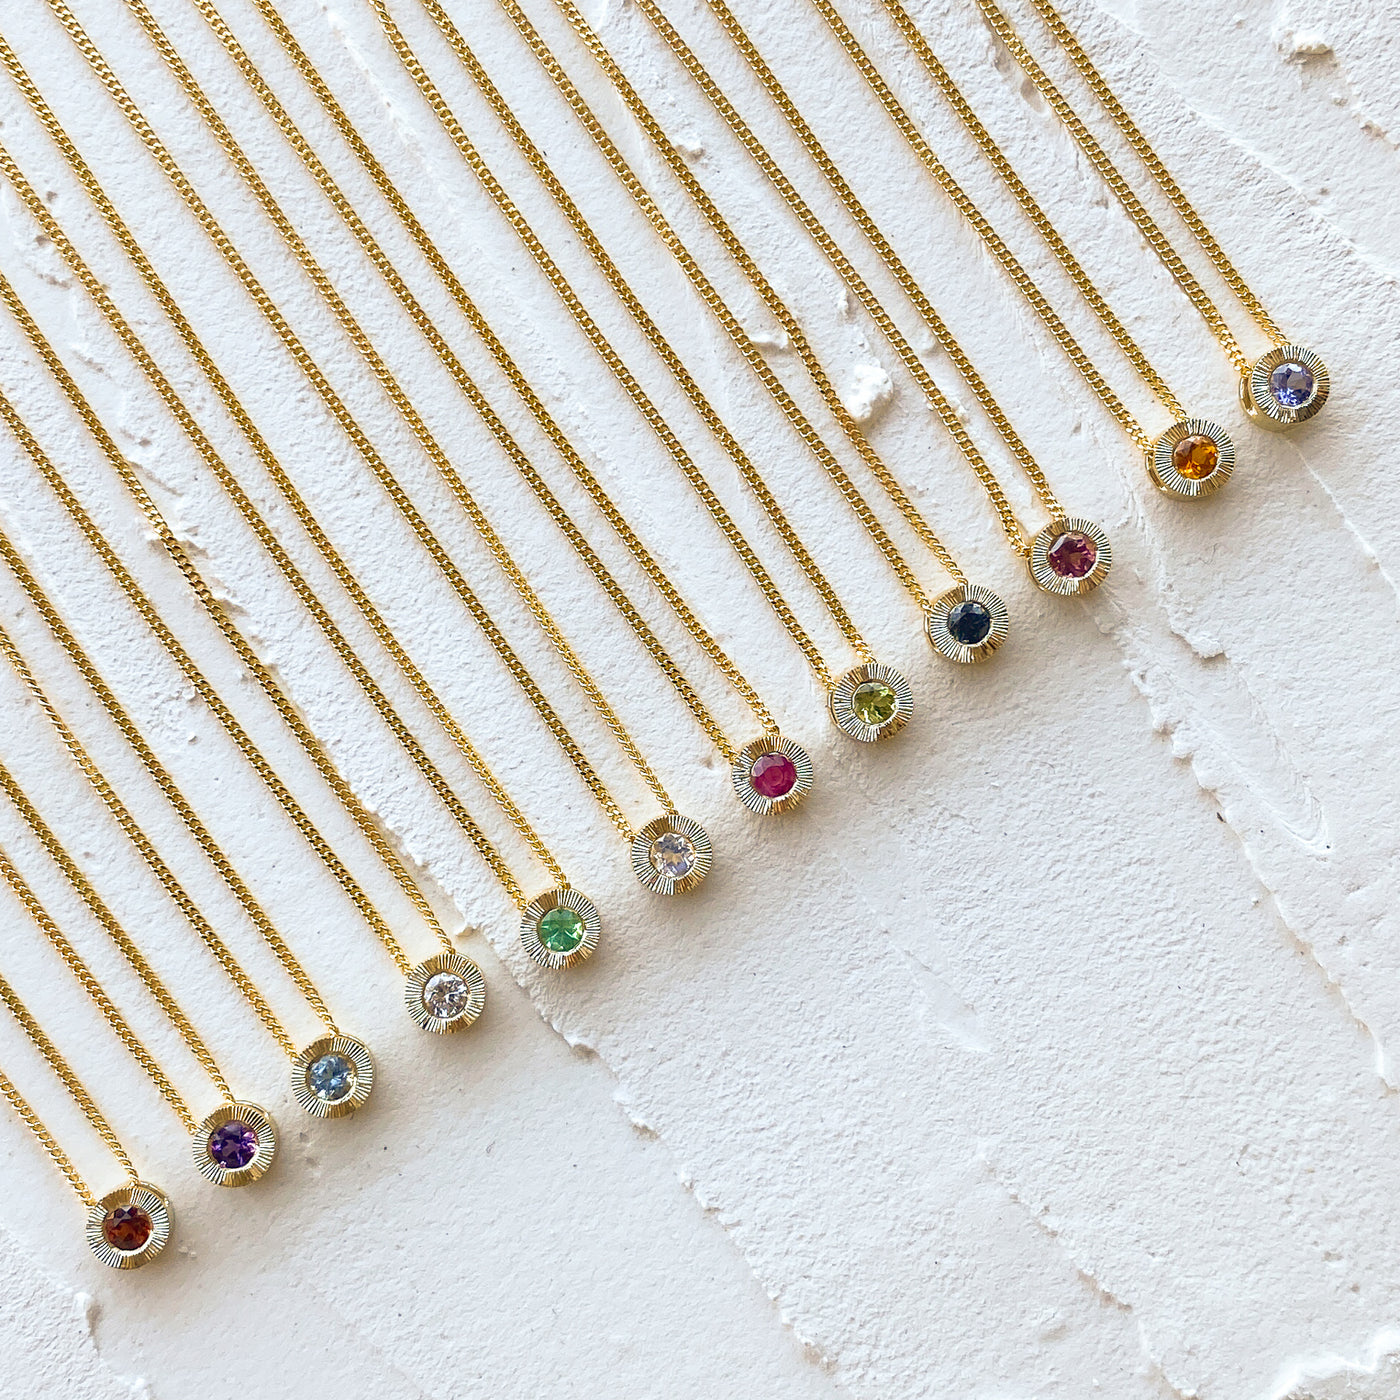 Birthstone Aurora necklaces in 14k yellow gold in each birthstone: garnet for January, amethyst for February, aquamarine for March, diamond for April, emerald for May, moonstone for June, ruby for July, peridot for August, blue sapphire for September, pink tourmaline for October, citrine for November, and tanzanite for December